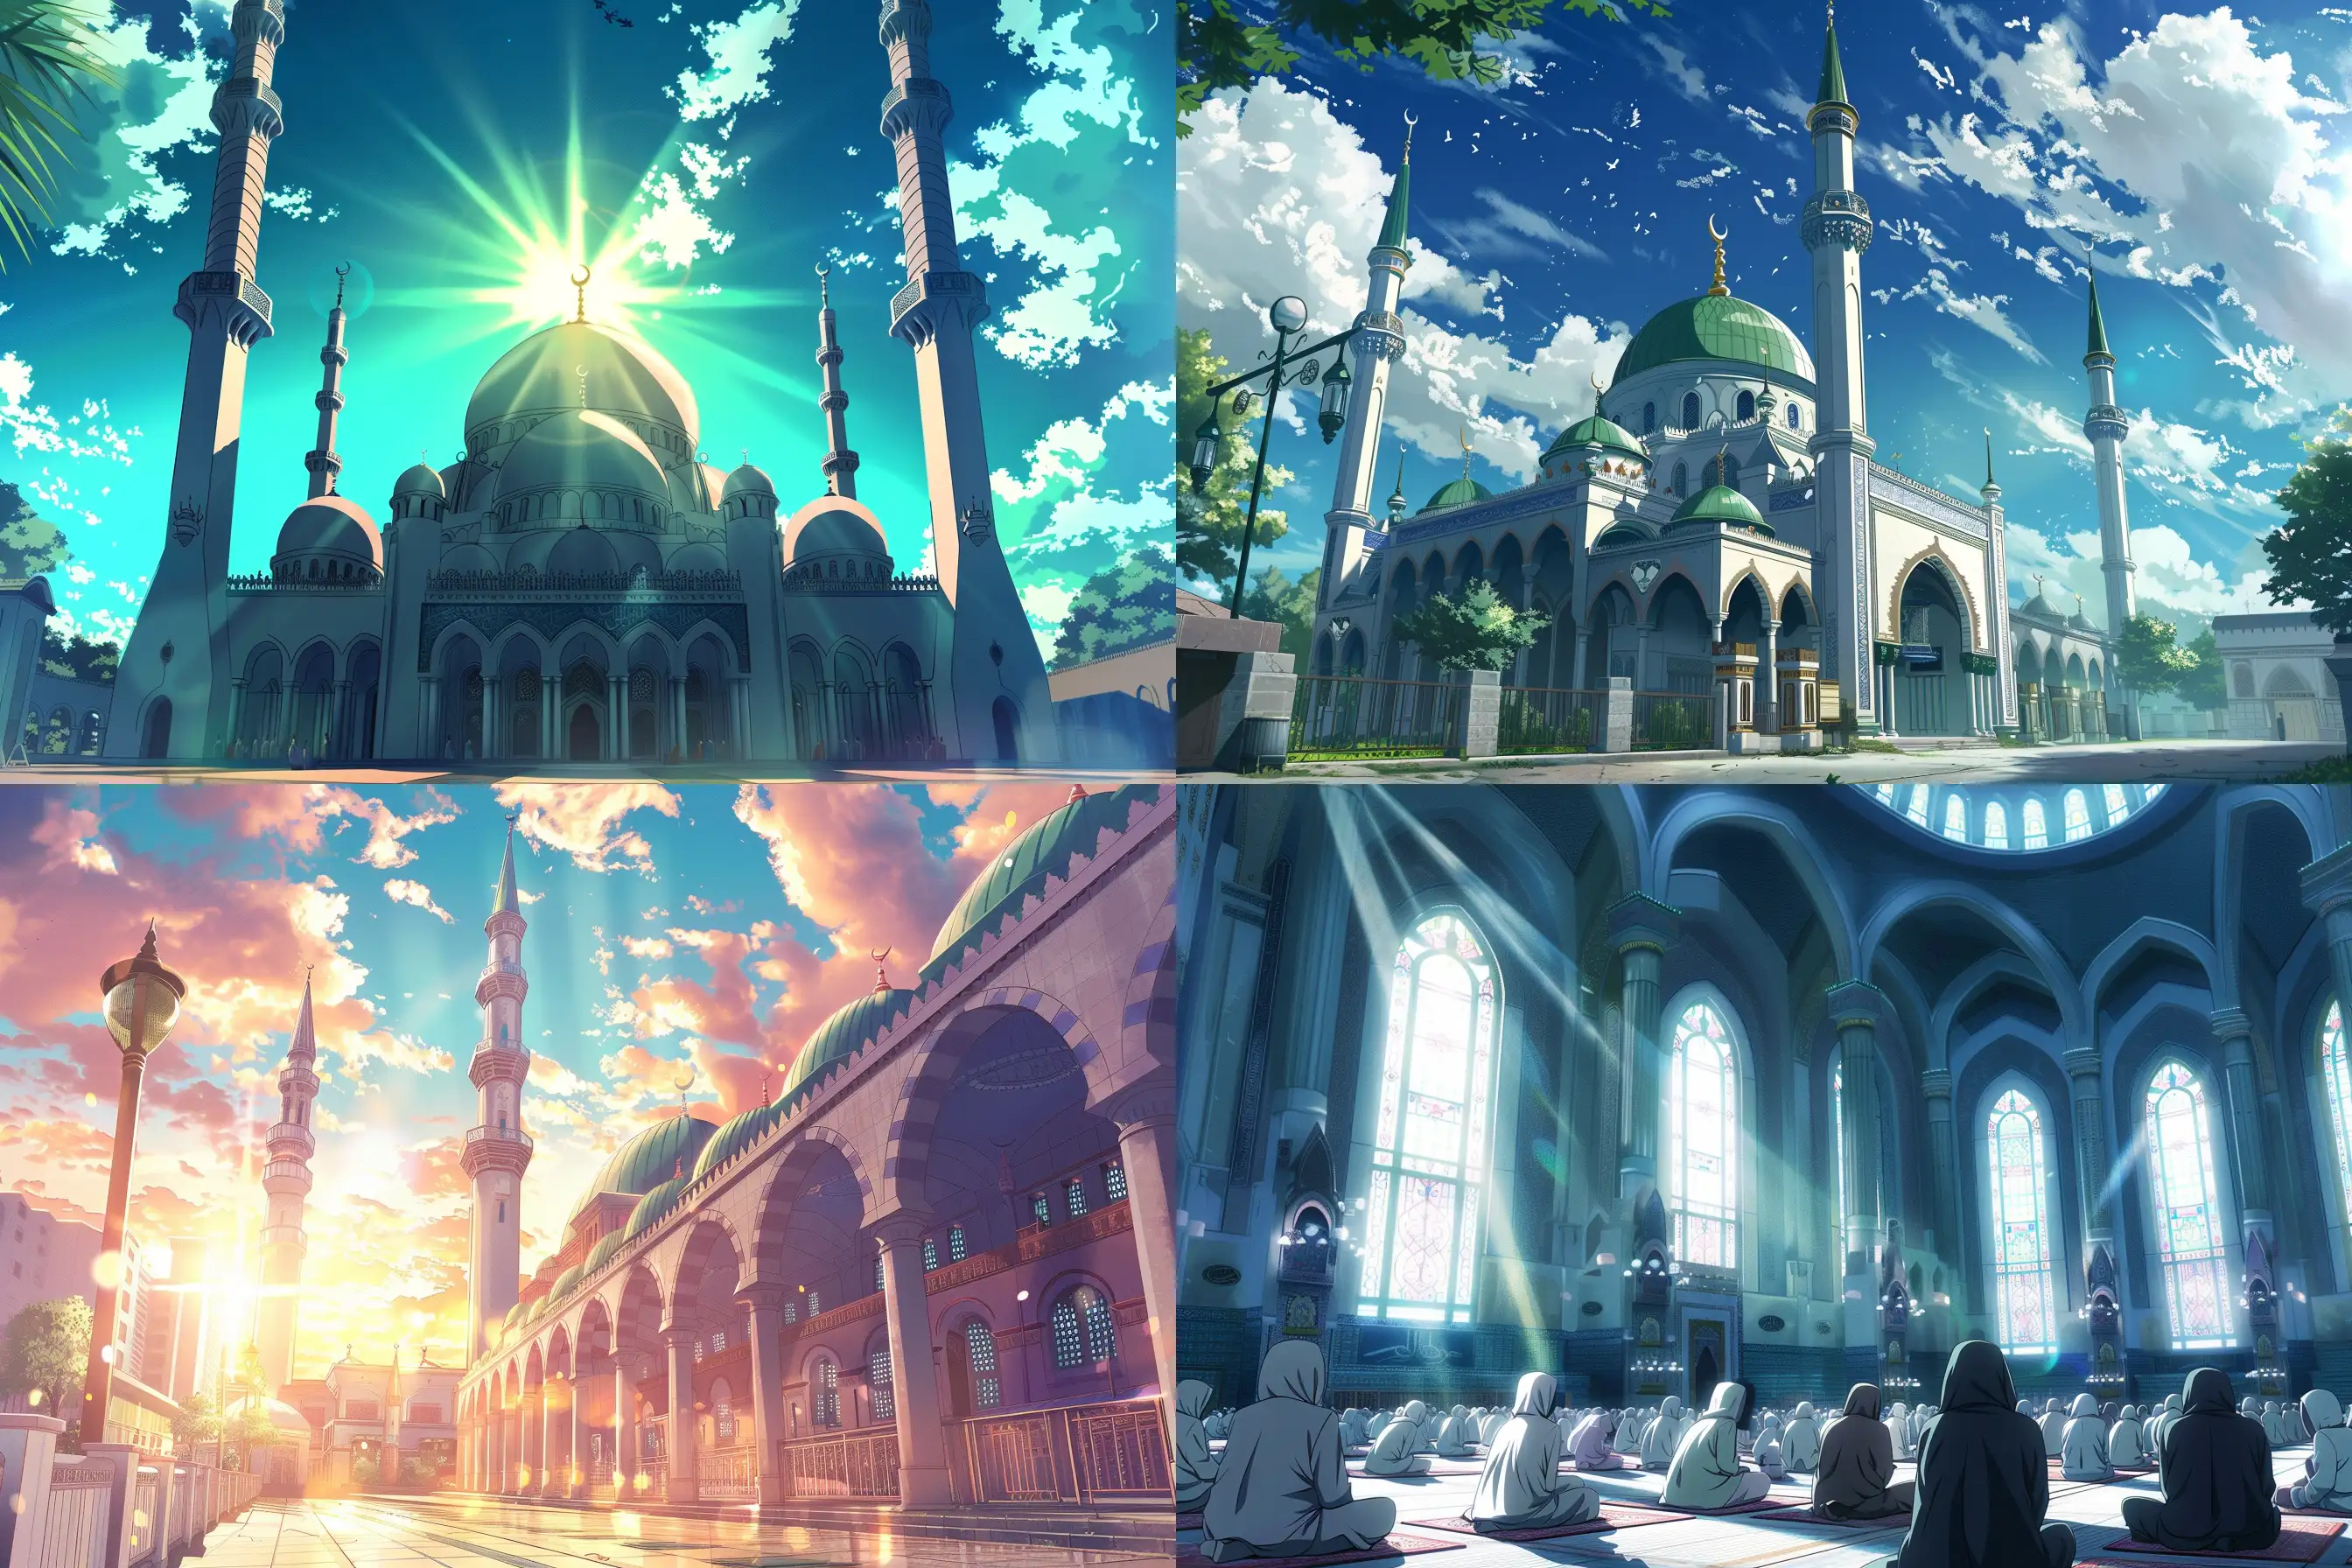 Blinding-Shine-of-the-Masjid-in-Anime-Style